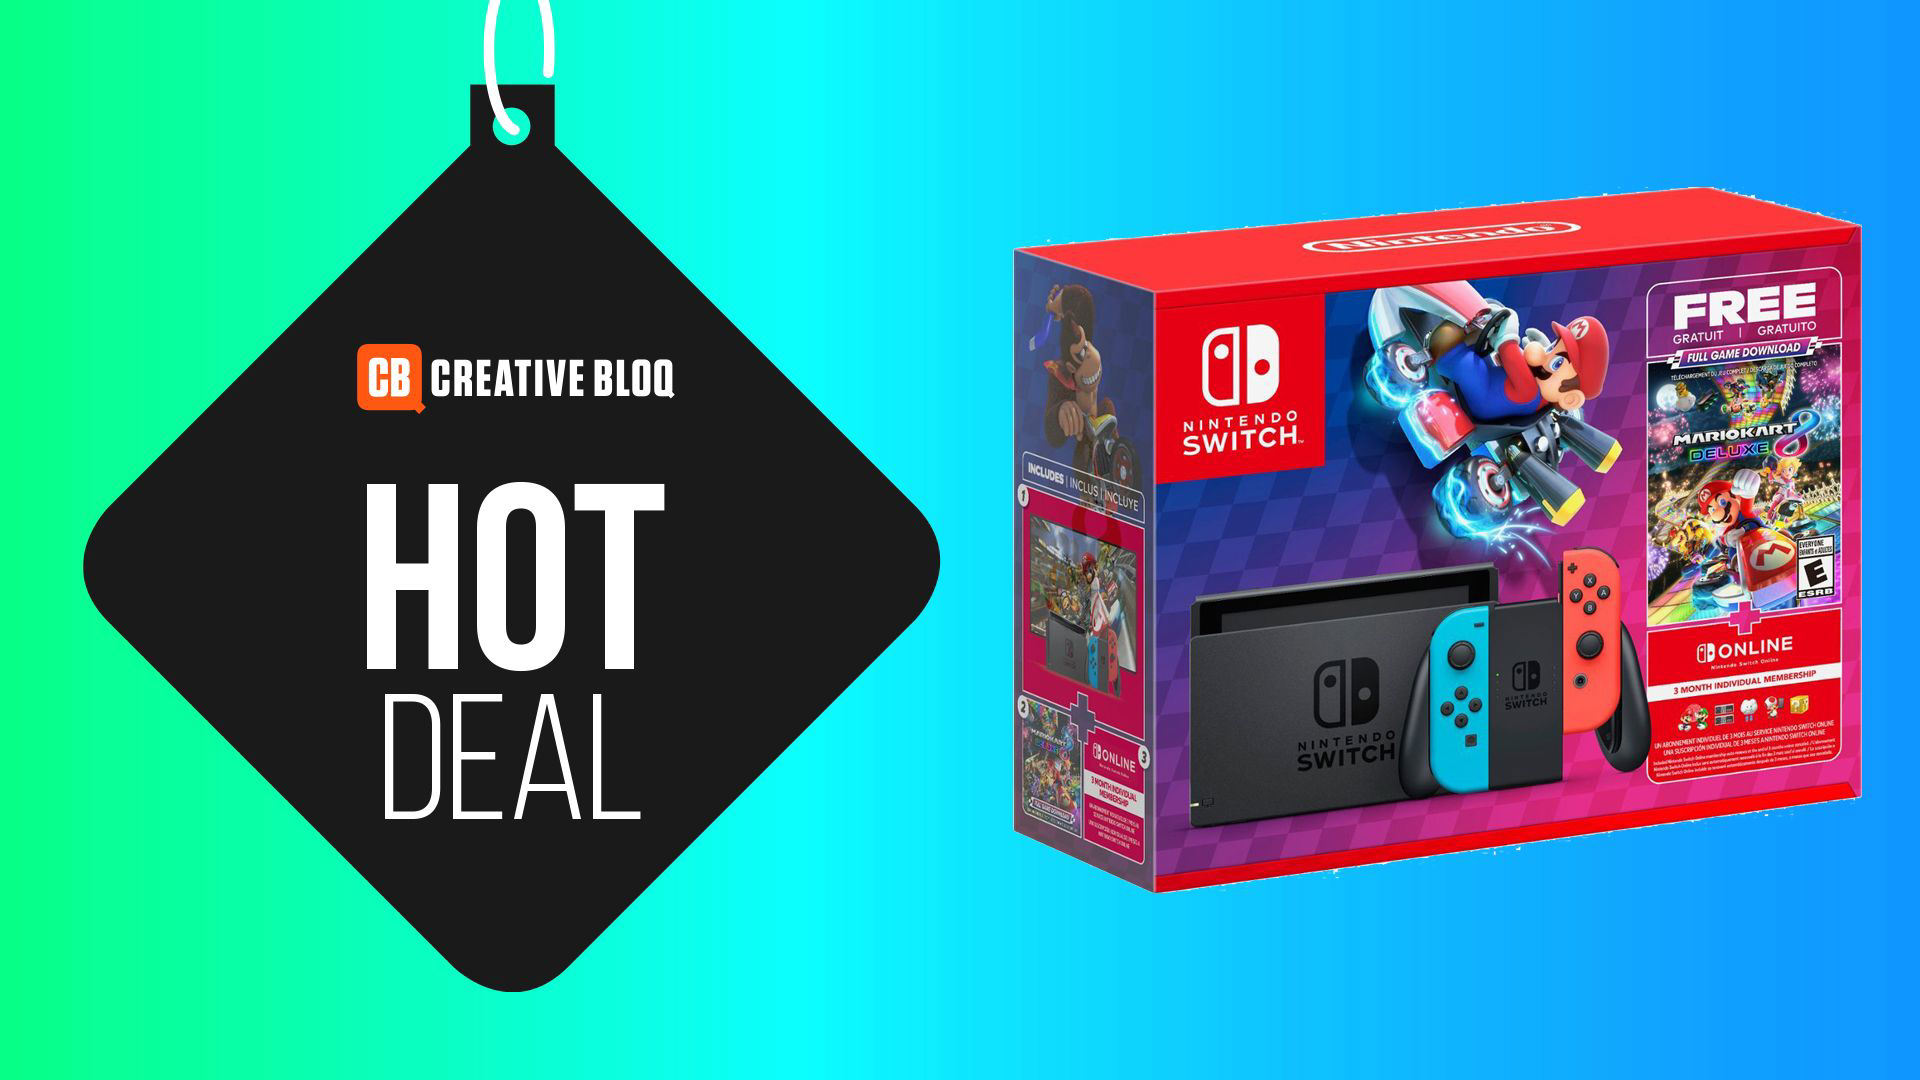 Our Favourite Nintendo Switch Black Friday Bundle Has Come Early This Year 